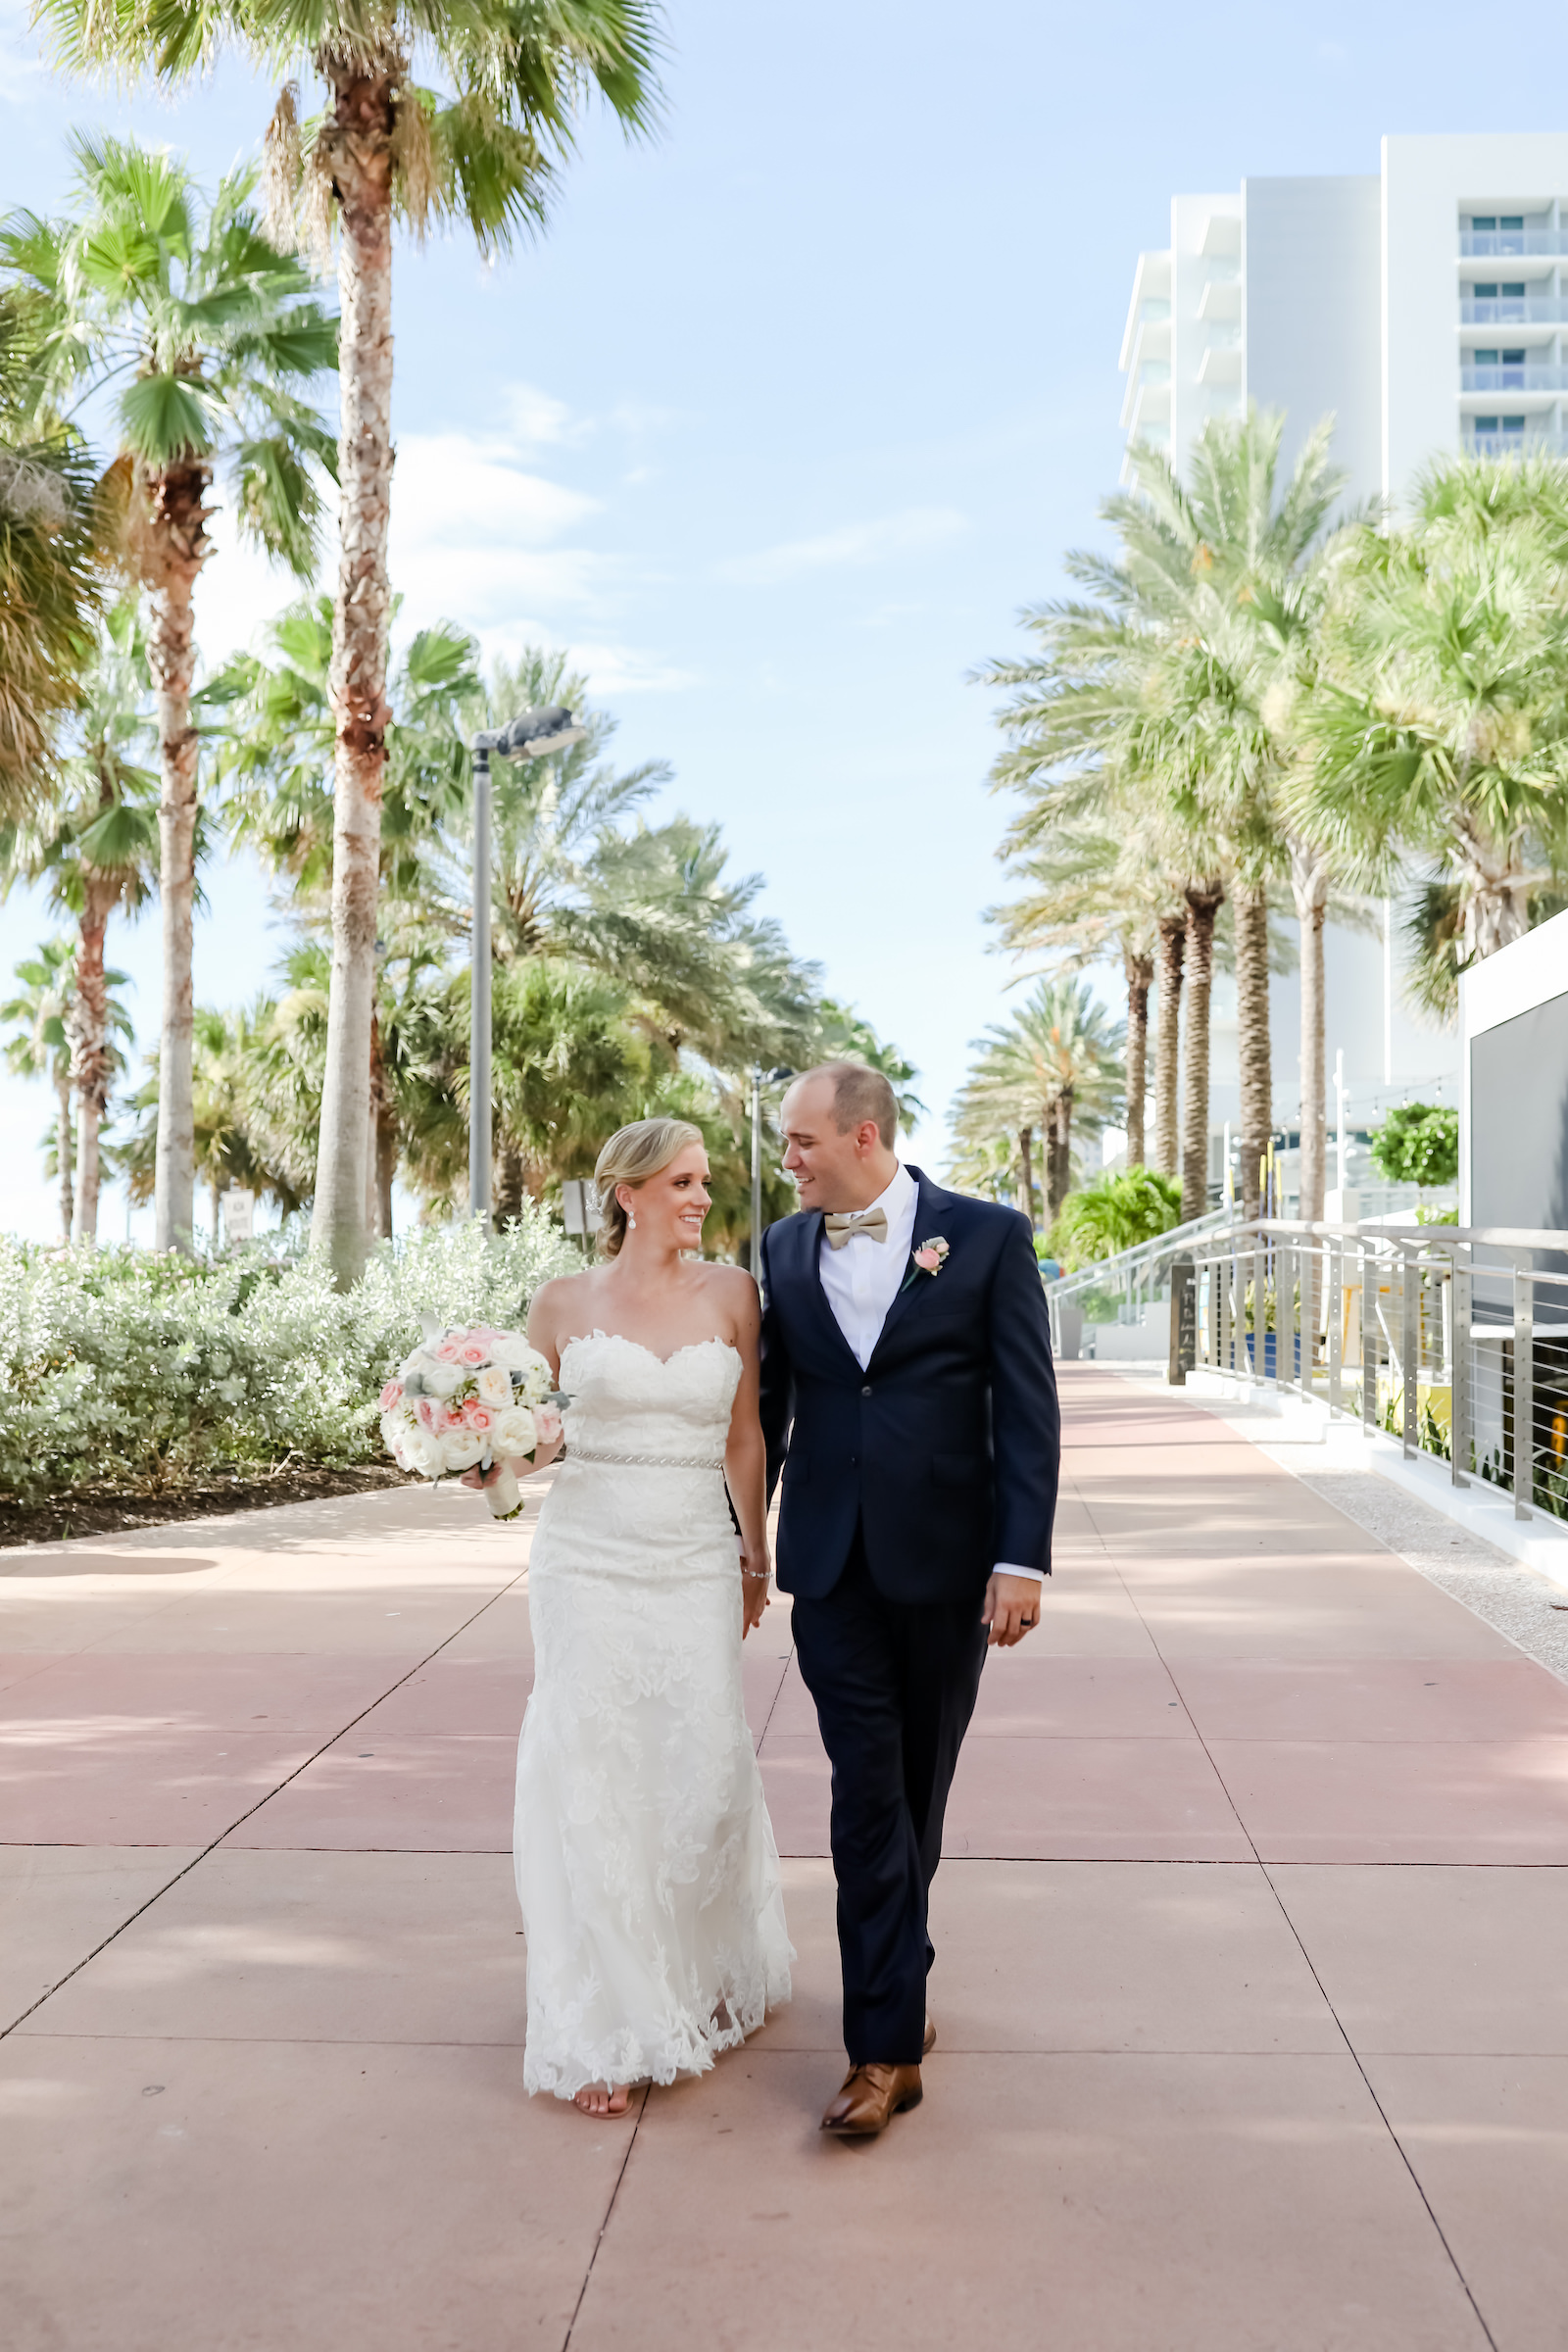 Bride and Groom Outdoor Portrait at Clearwater Beach Wedding | Bridal Gown Hanger Shot | Strapless Sweetheart Lace A Line Wedding Dress with Rhinestone Waistband | Blush Pink and White Rose Bouquet | Groom in Classic Navy Blue Suit with Champagne Bow Tie | Lifelong Photography Studios